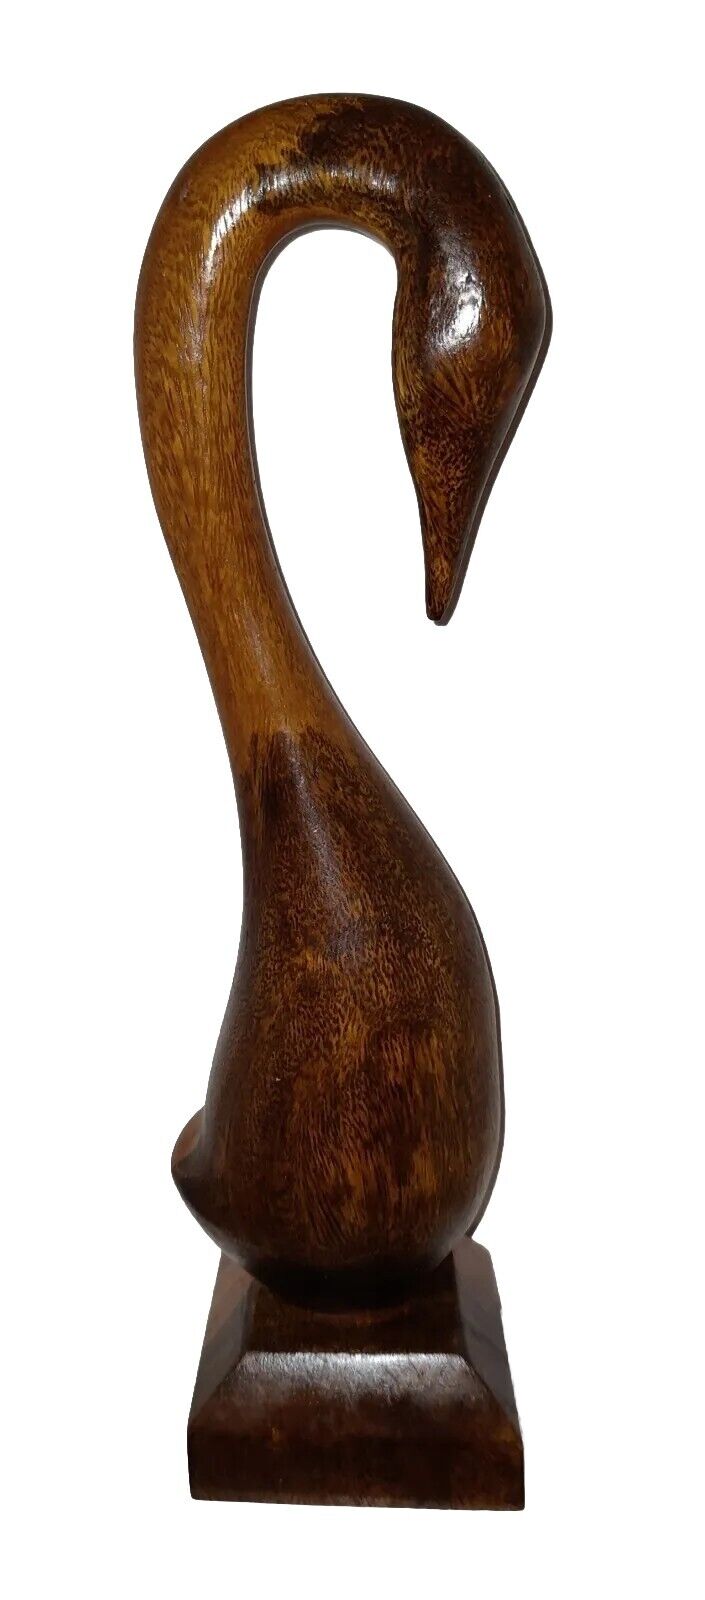 Carved Wooden Swan Bird Sculpture Figure Long Neck MCM Style Unmarked 